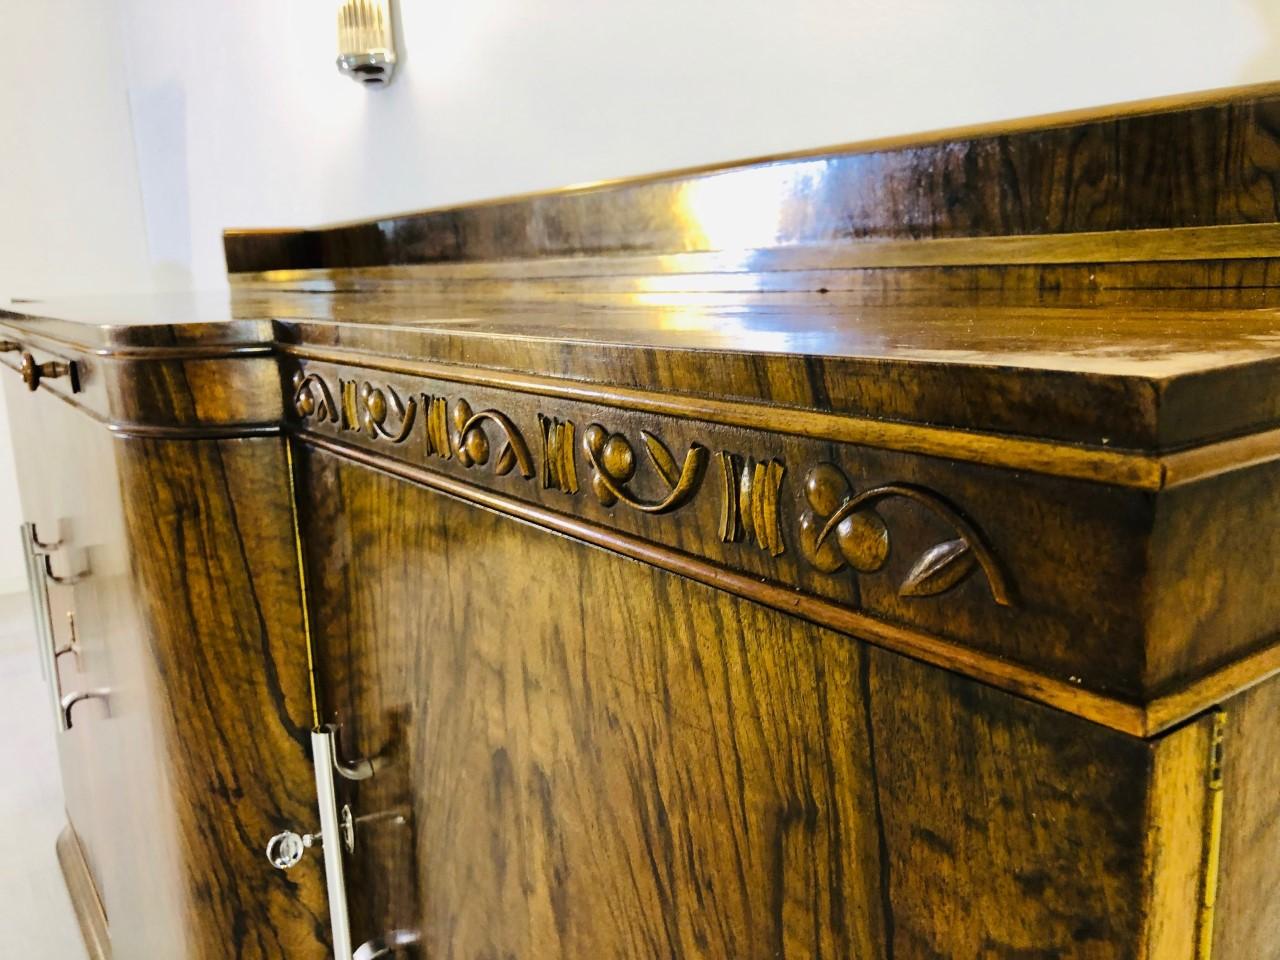 Hand-Crafted Large Original Art Deco Sideboard made of Walnut with Cherry Ornamentation